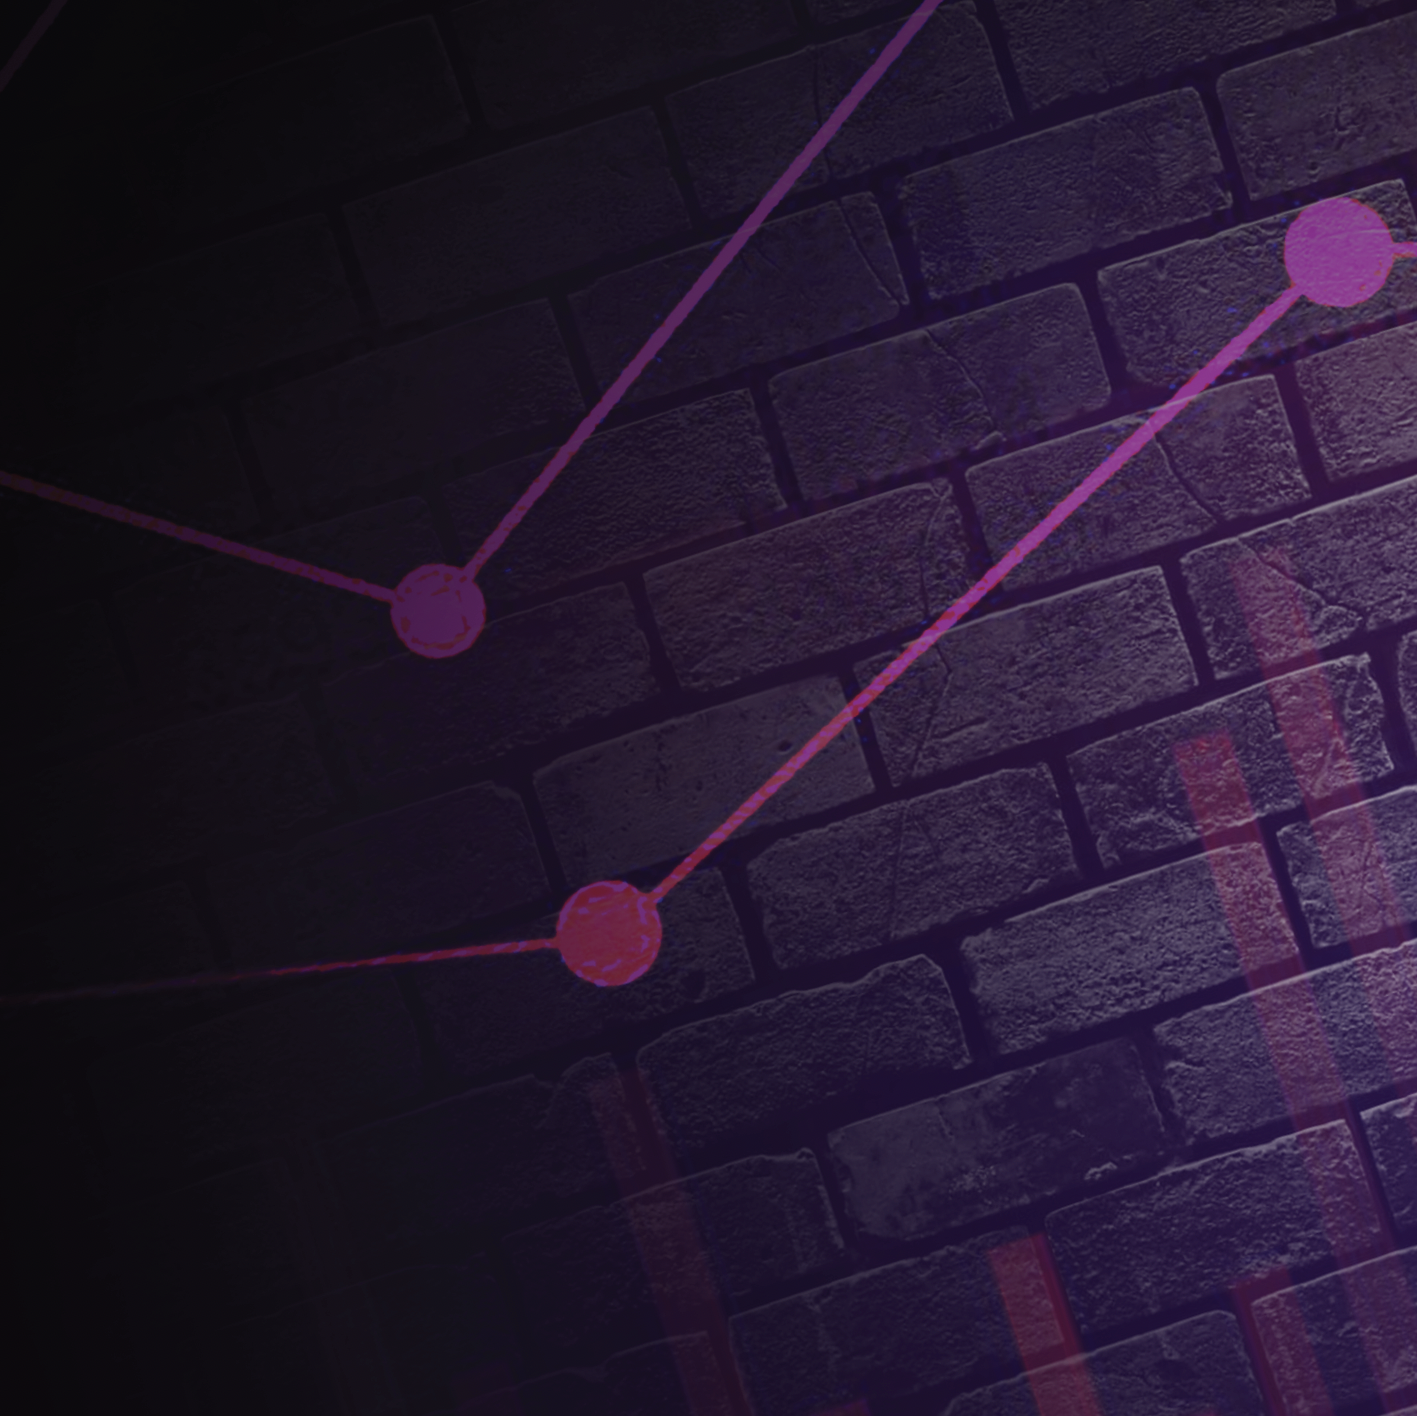 Dark purple brick background with pink line and bar graph overlay. Vivid Roots Collective logo in foreground (purple circle with a line cutting across horizontally. Above the purple 'earth' line is a green sapling shape, below the purple 'earth' line are green roots shapes).